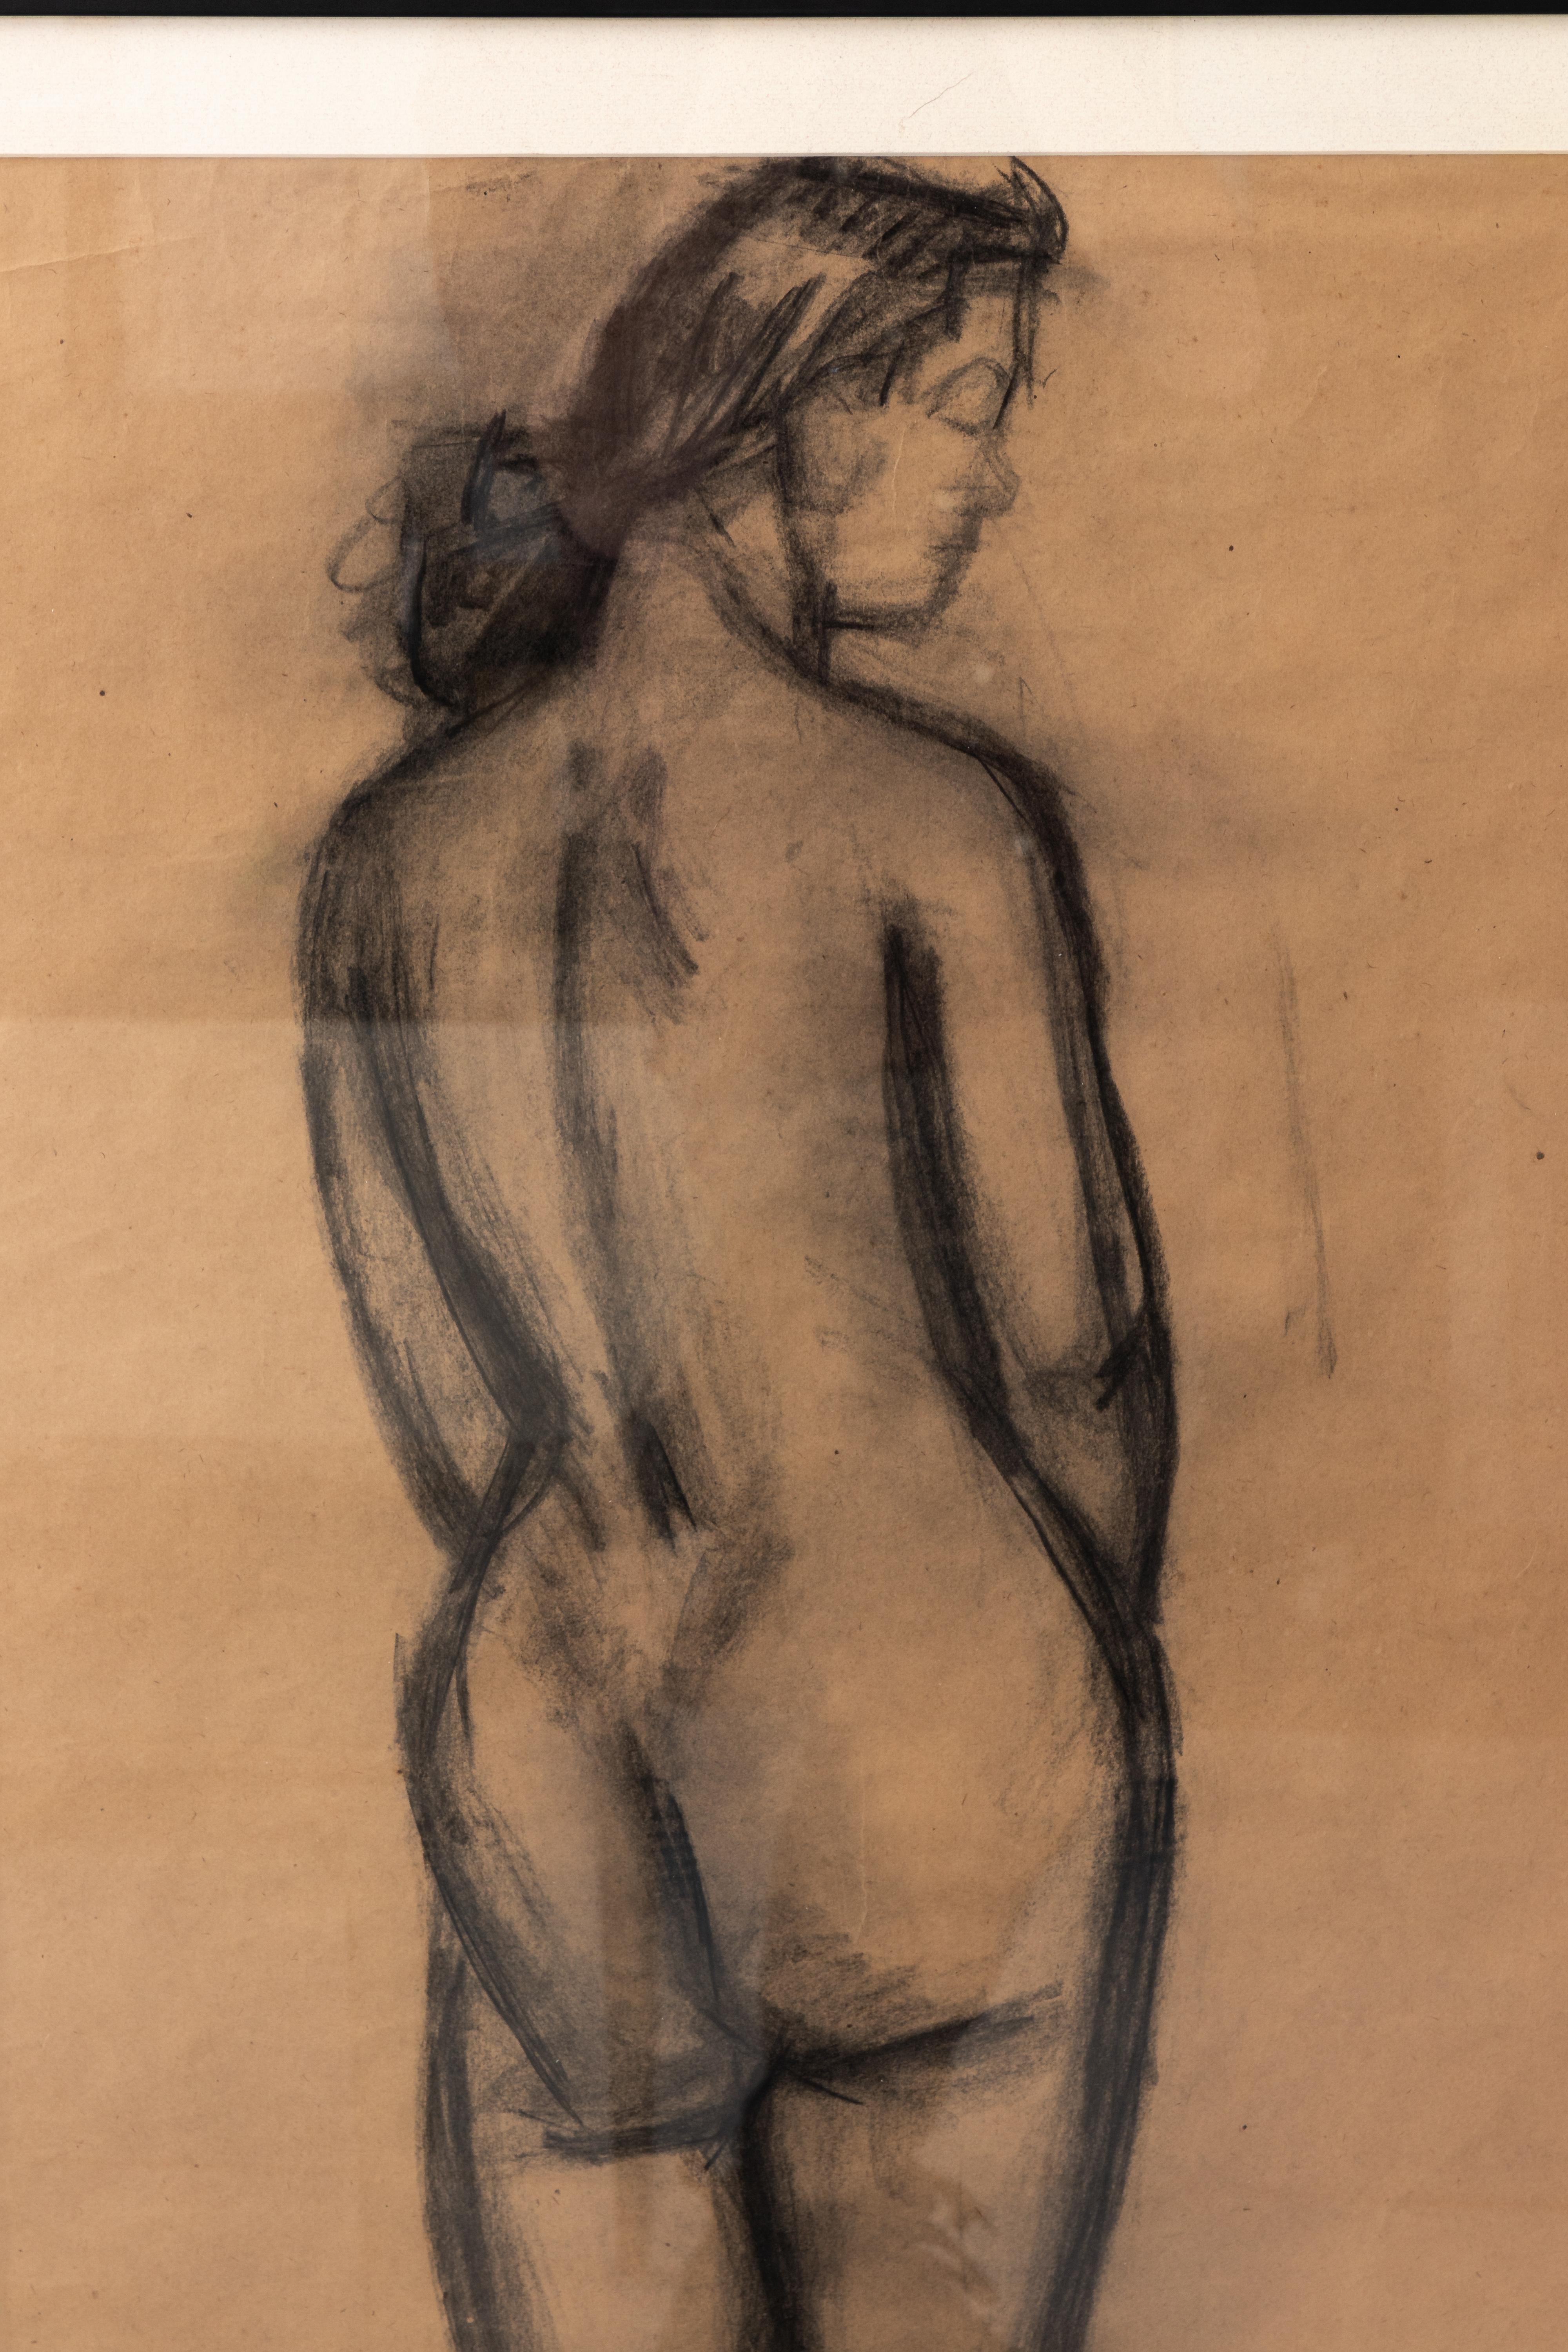 Modernist nude study of the female figure by an anonymous artist, circa early 20th century. Loose, expressive strokes with emphatic shading. Drawn in charcoal on paper. We have two related works in this bold style by the same artist. Mounted in a